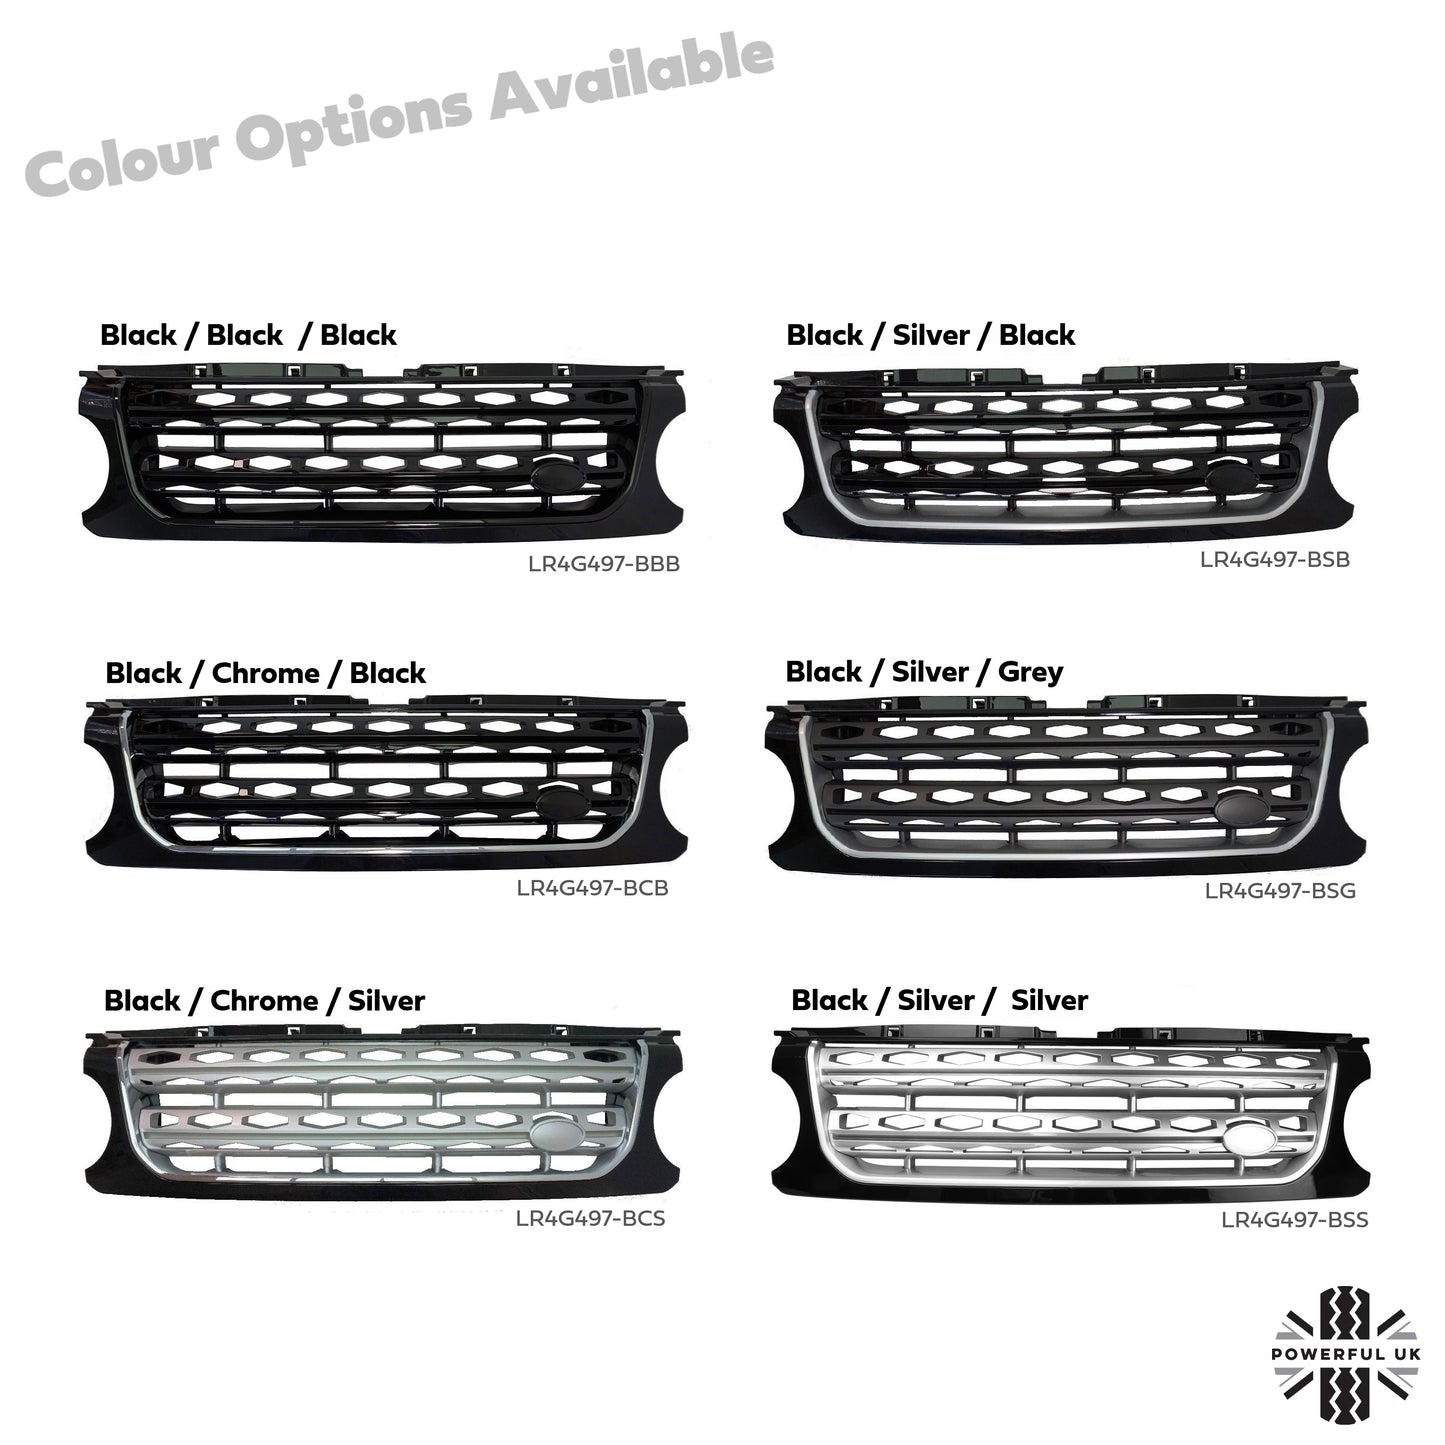 Front Grille "facelift look" - Black / Silver / Silver - for early Land Rover Discovery 4